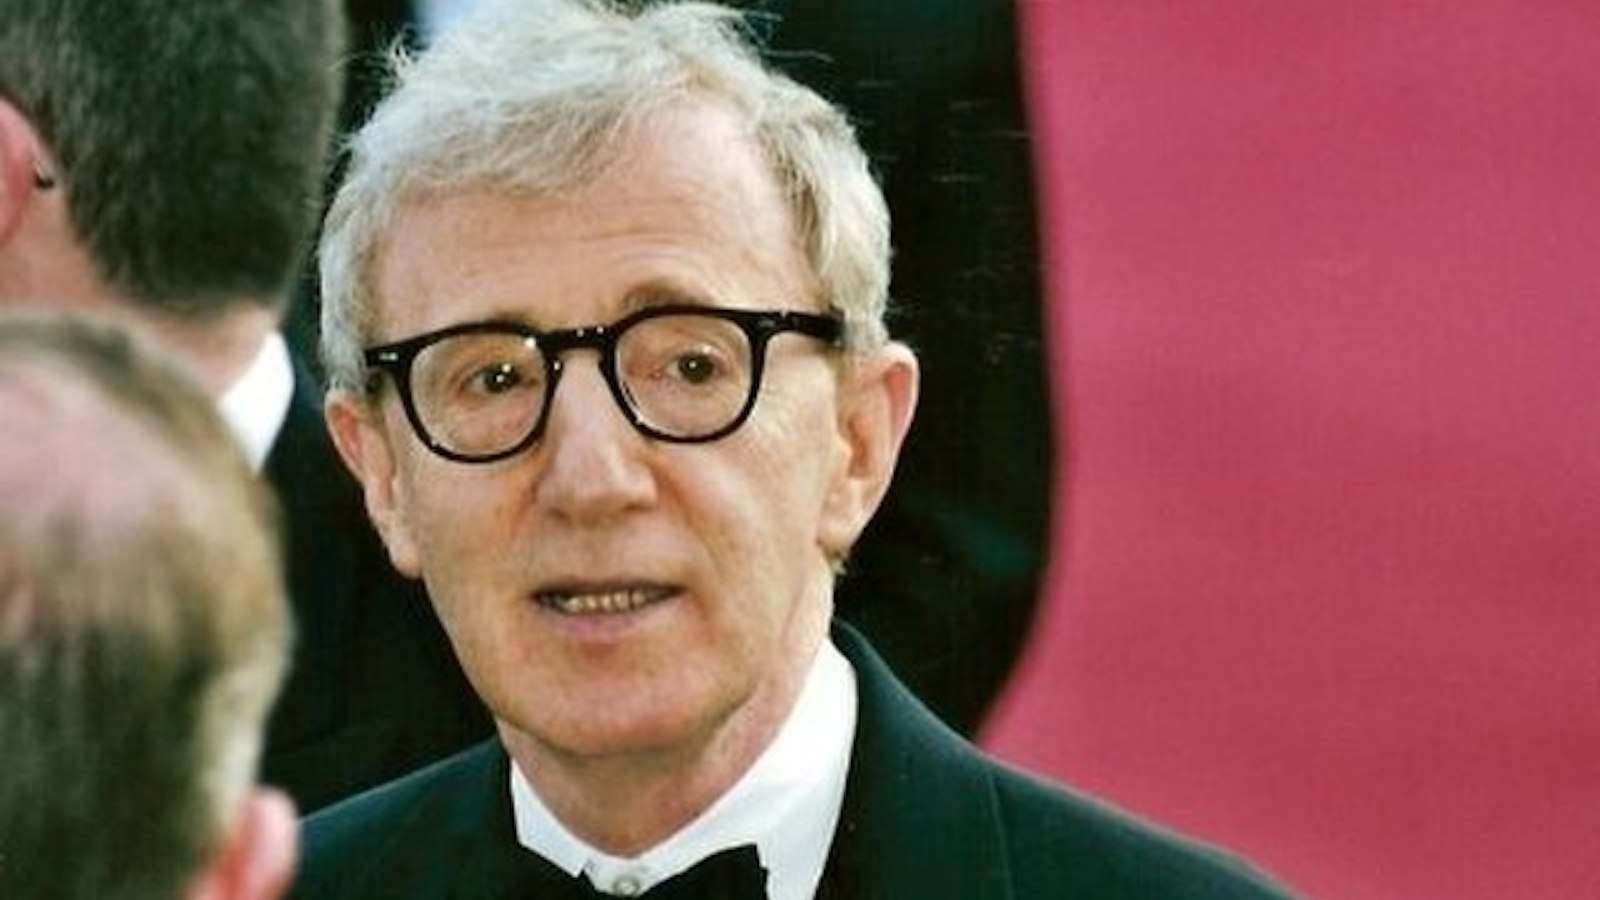 Woody Allen at Cannes Film Festival